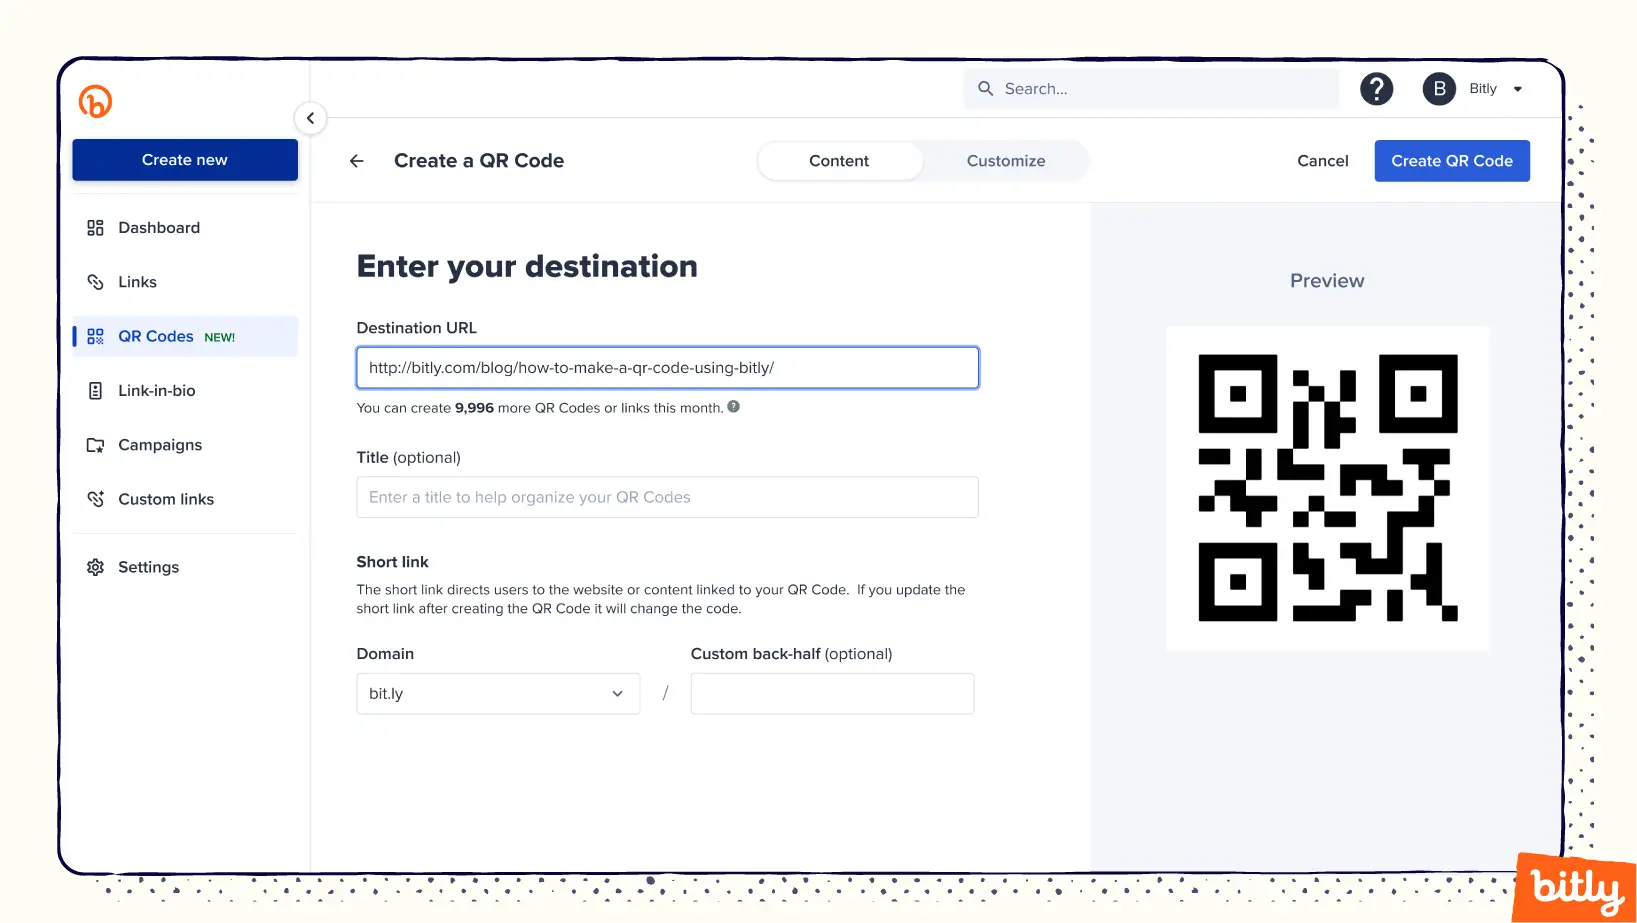 The area of the Bitly Dashboard for entering information about a QR Code.